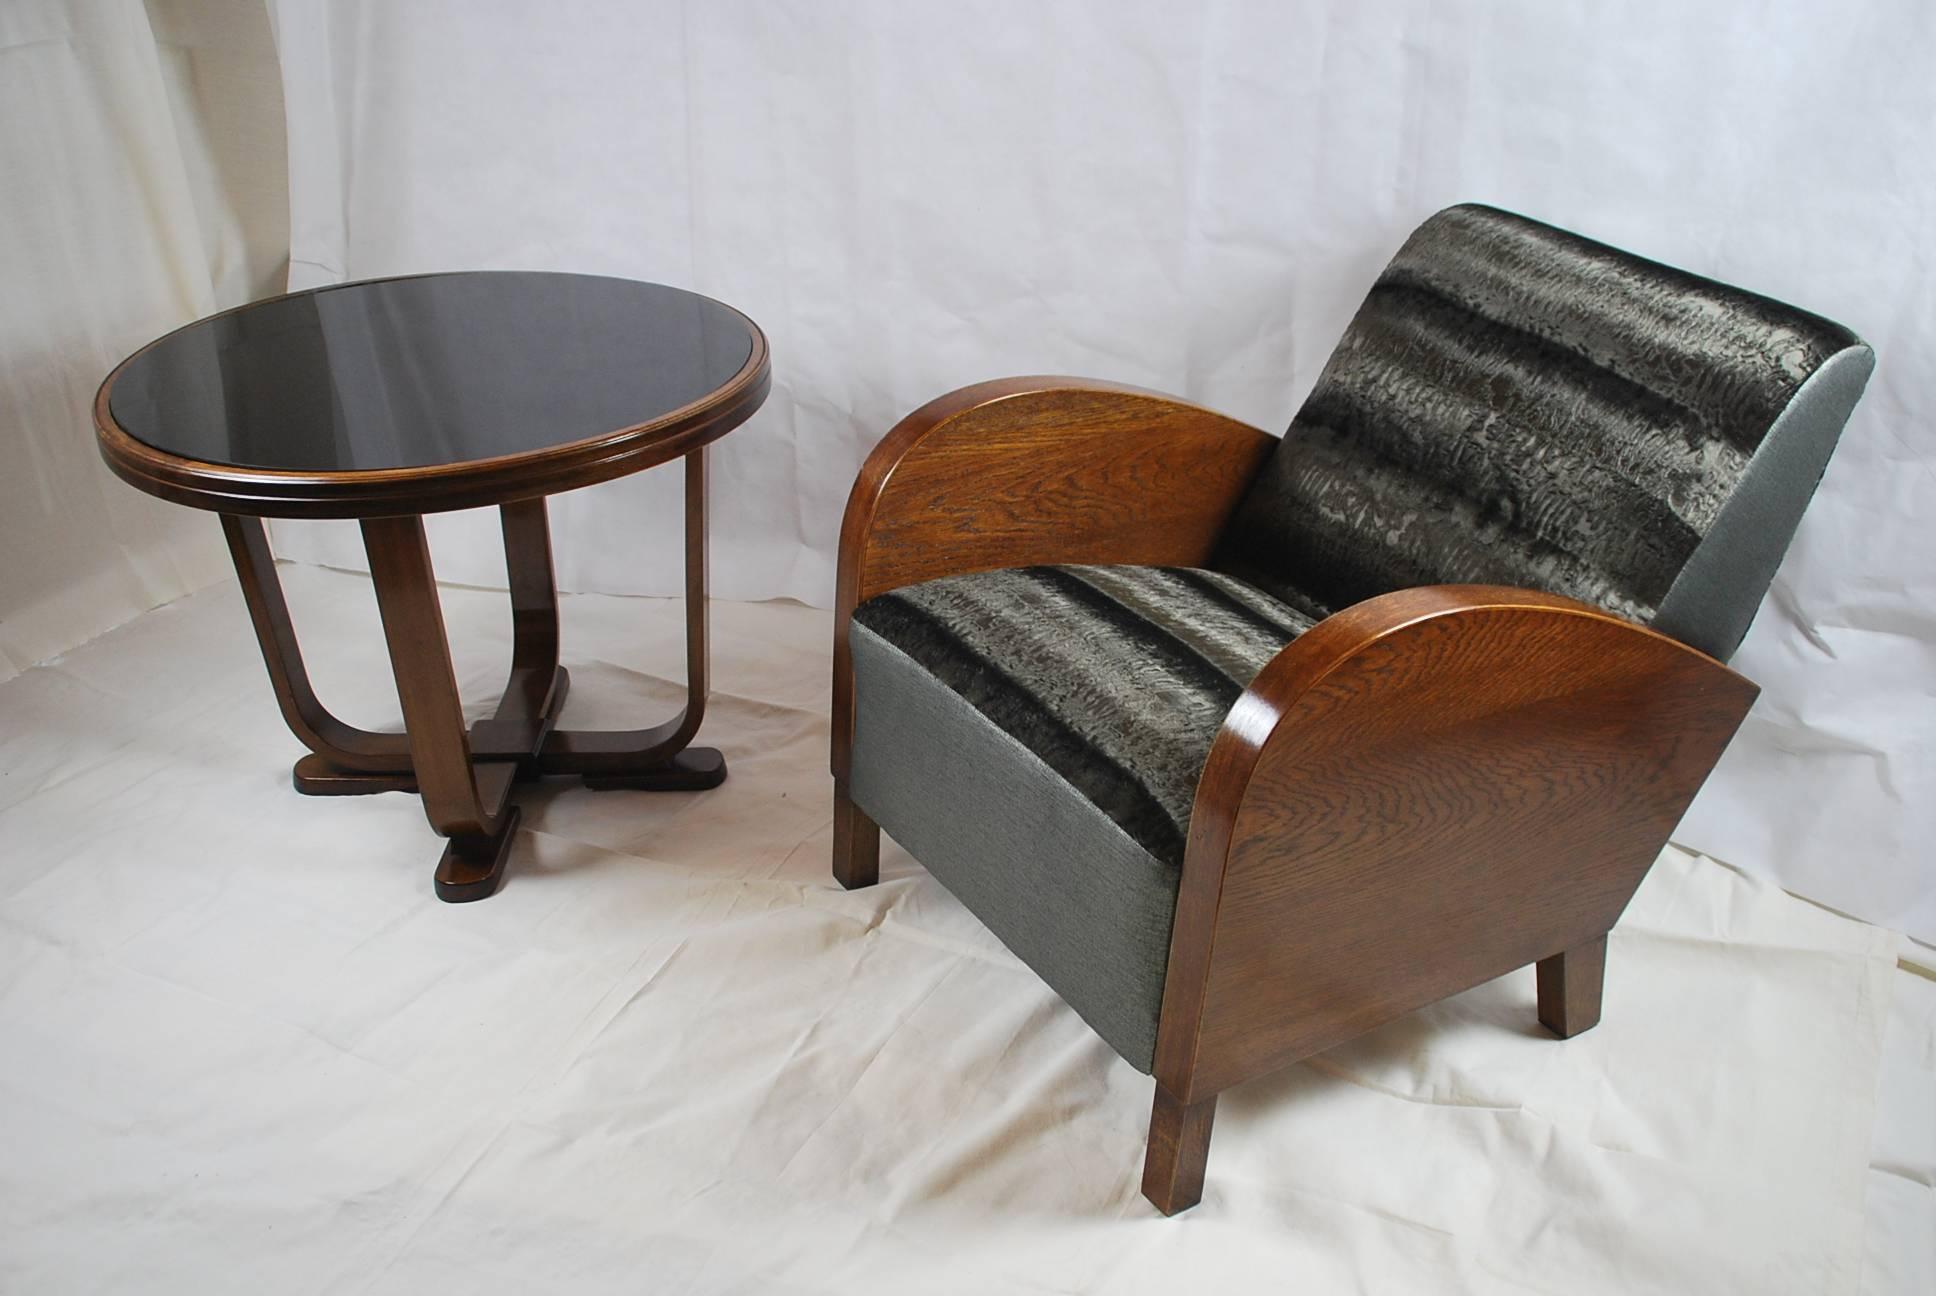 Custom-Made circa 1950s for Director of One of the Olomouc Company, Czech For Sale 4